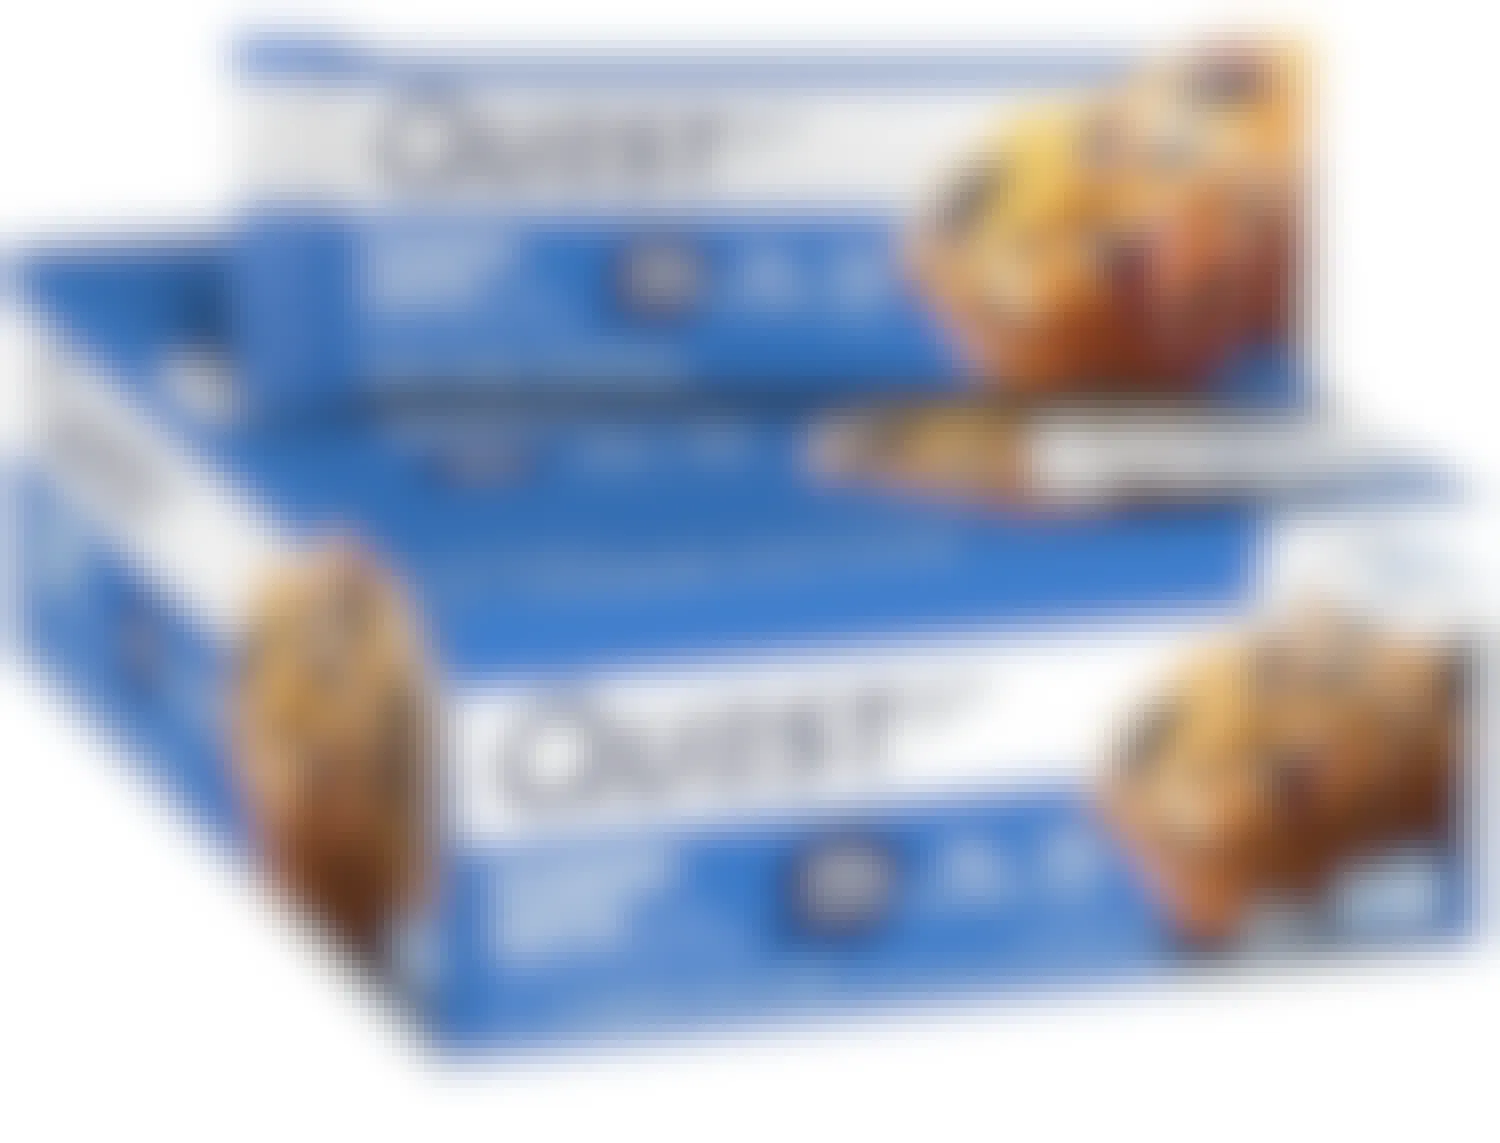 quest-bar-blueberry-muffin-amazon